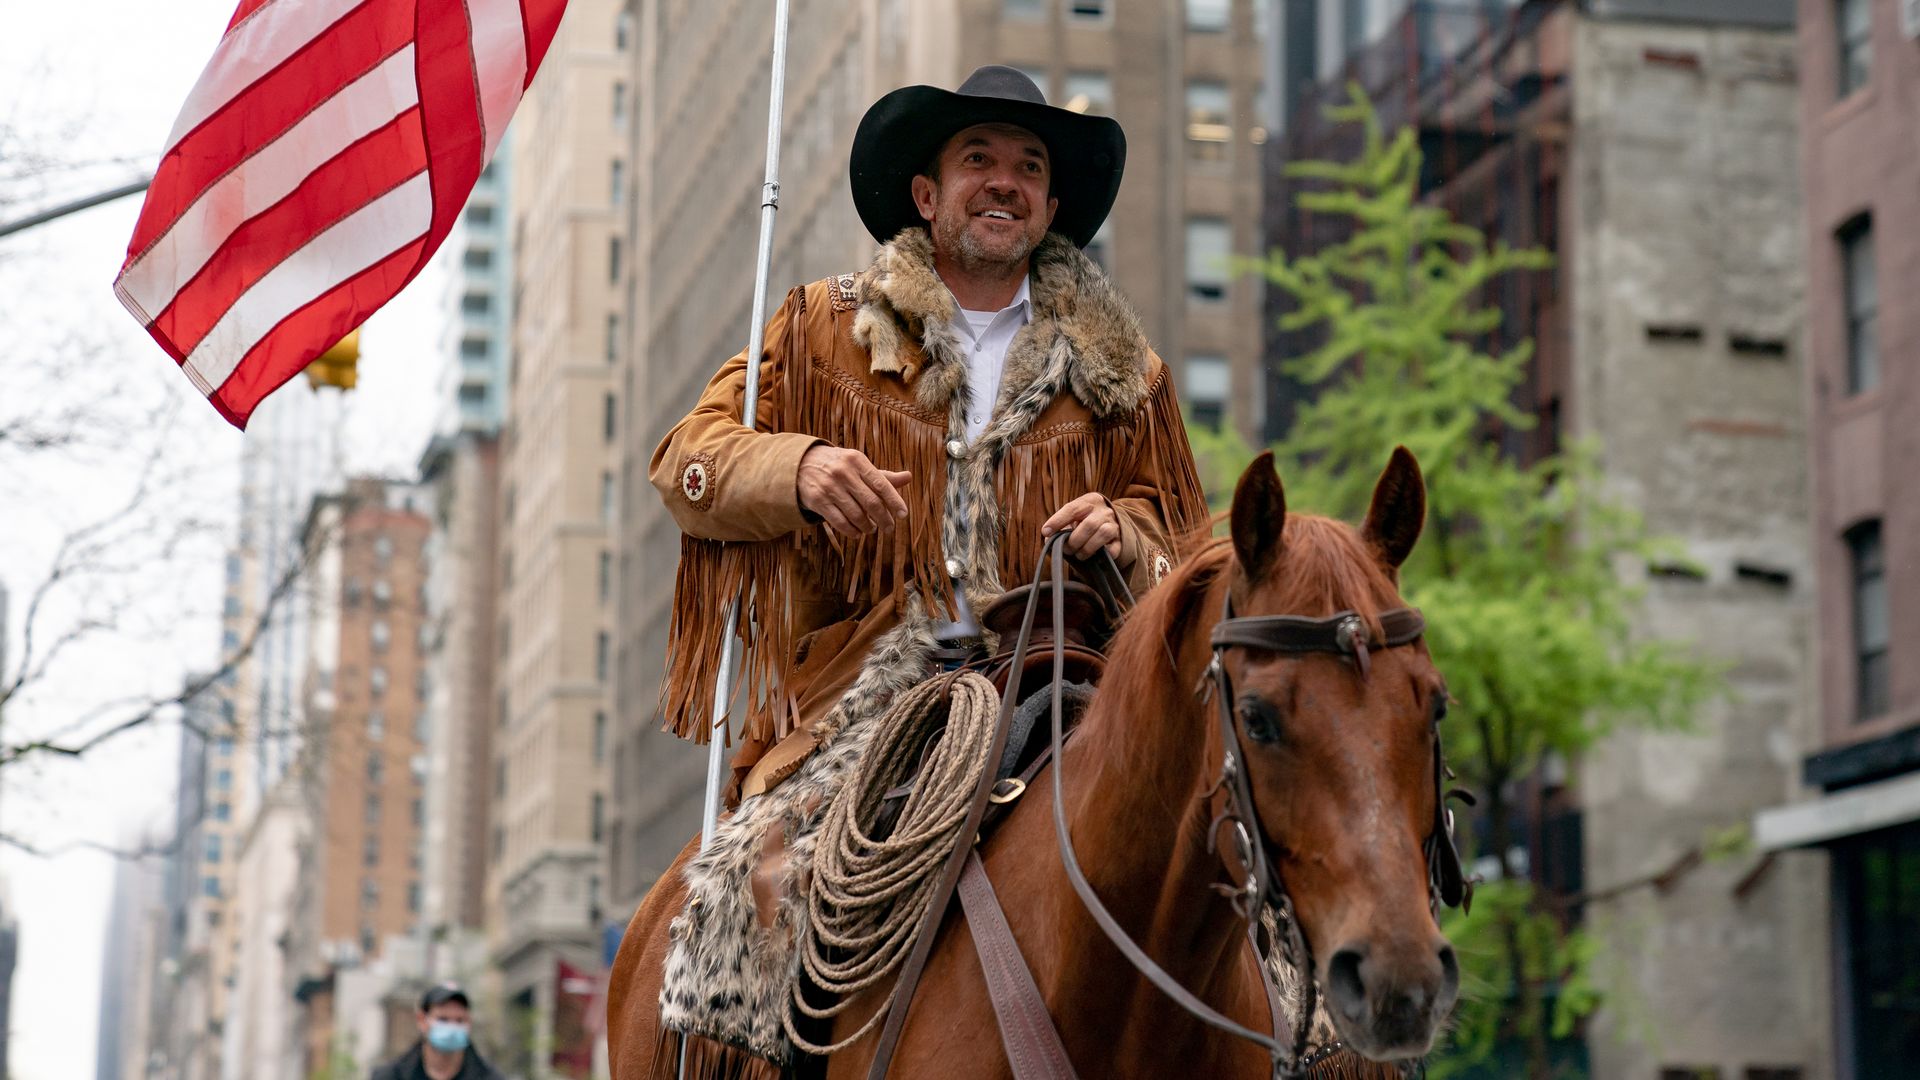 tero County Commission Chairman and Cowboys for Trump co-founder Couy Griffin rides his horse on 5th avenue on May 1, 2020 in New York City. 